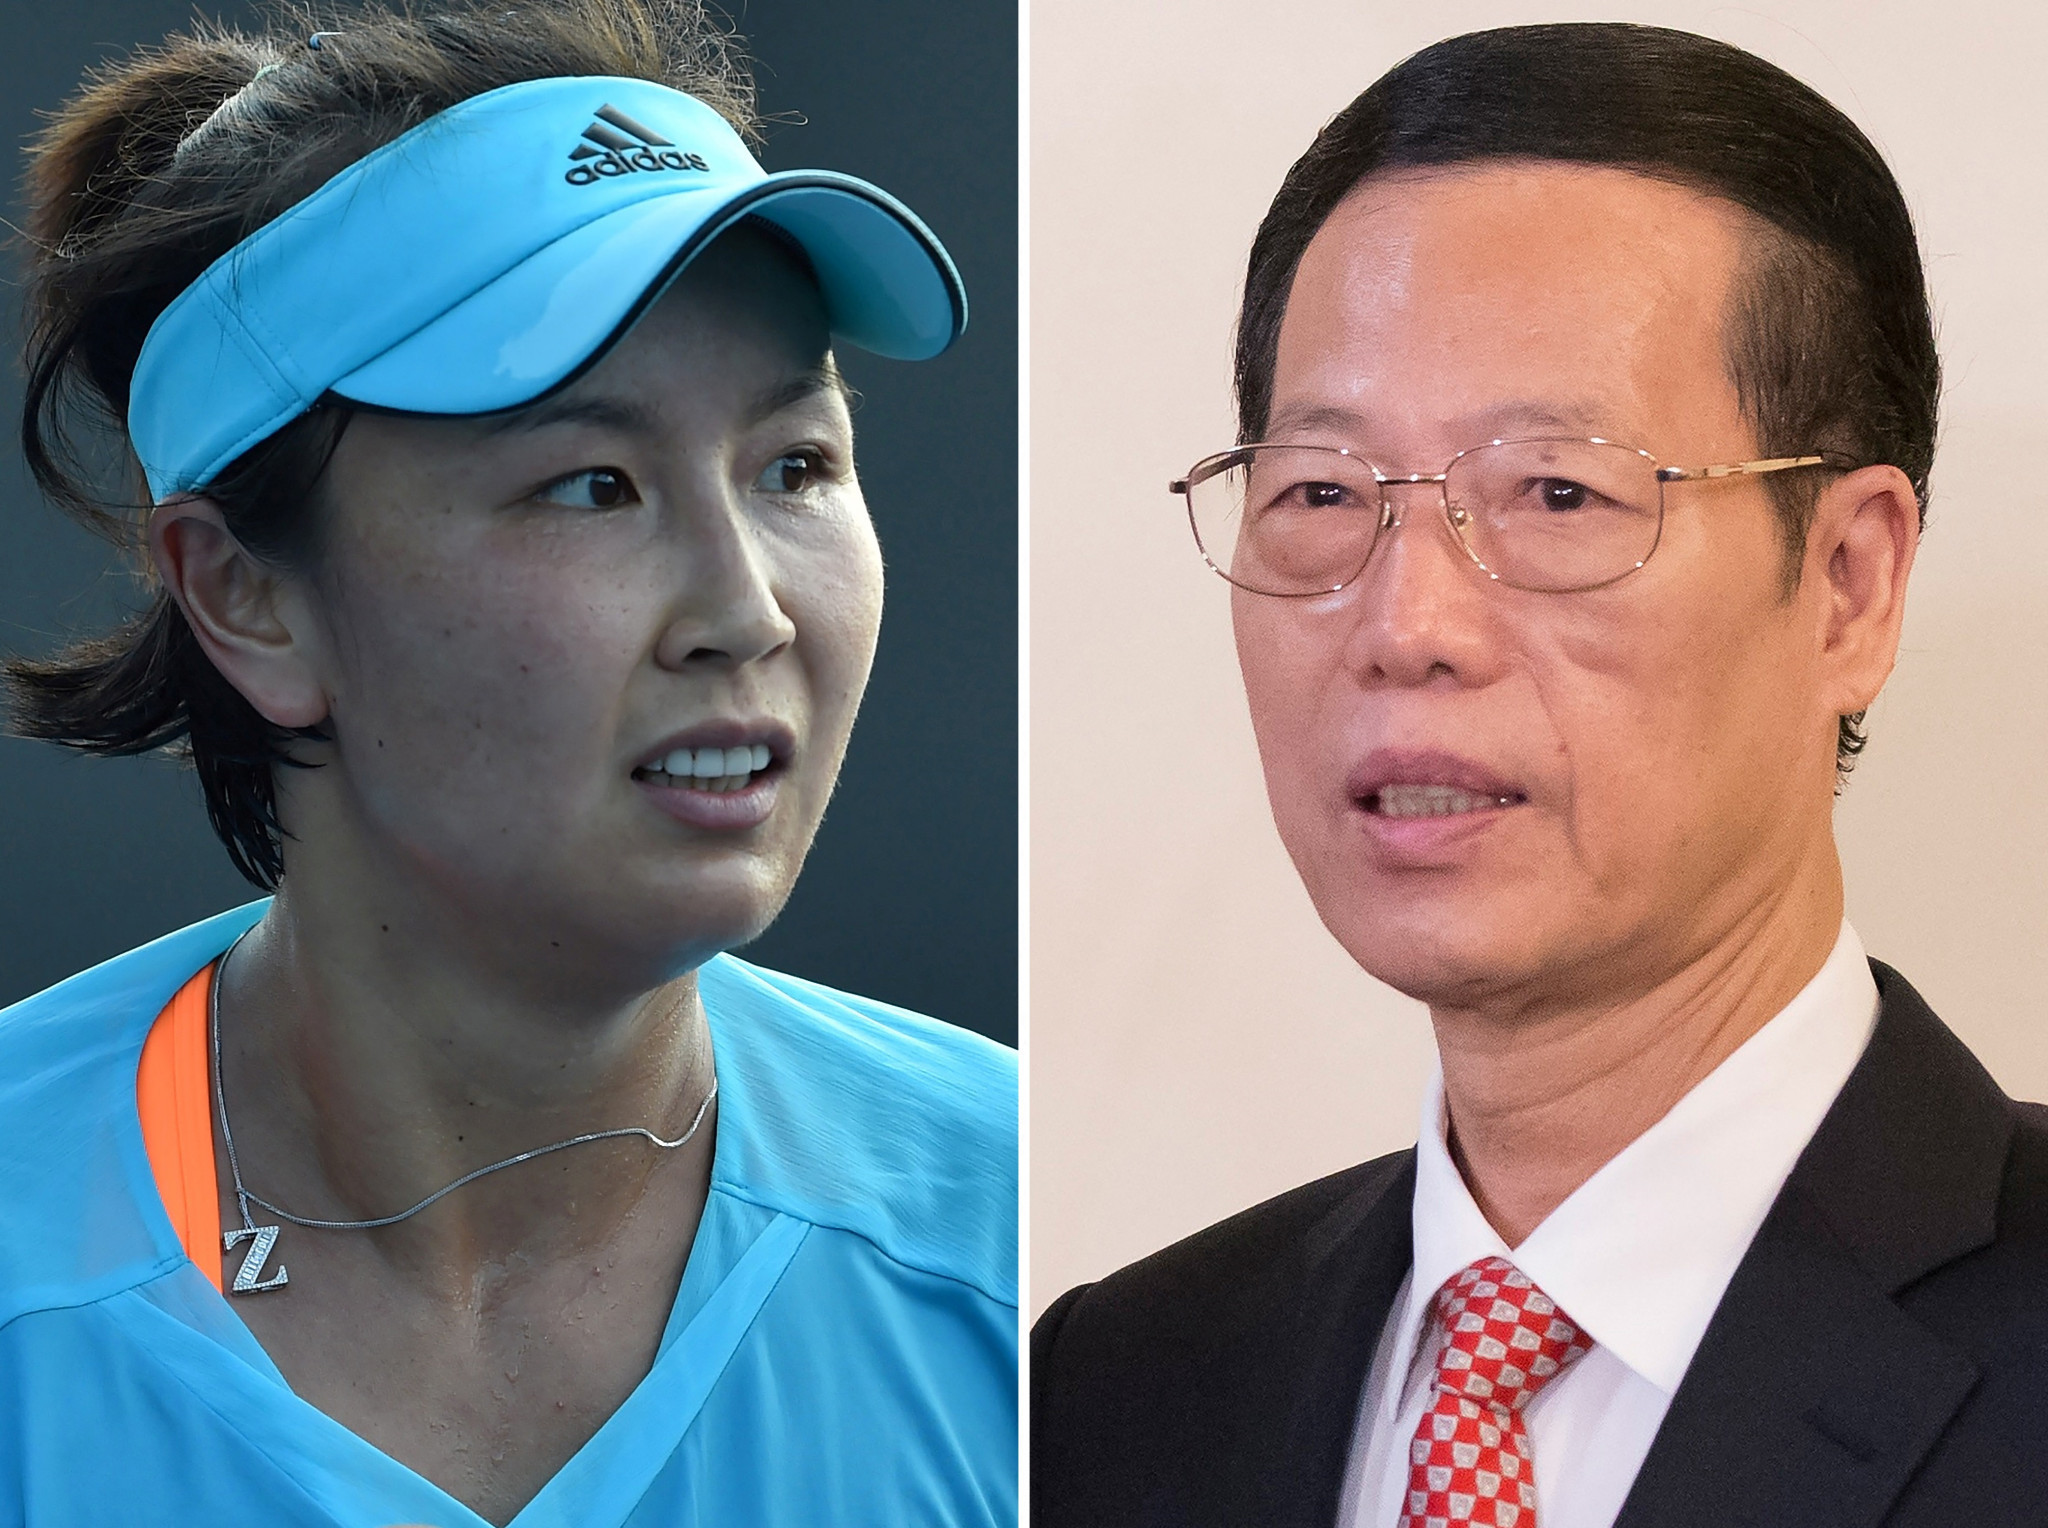 Peng Shuai has made allegations of sexual assault against China’s former vice-premier Zhang Gaoli ©Getty Images